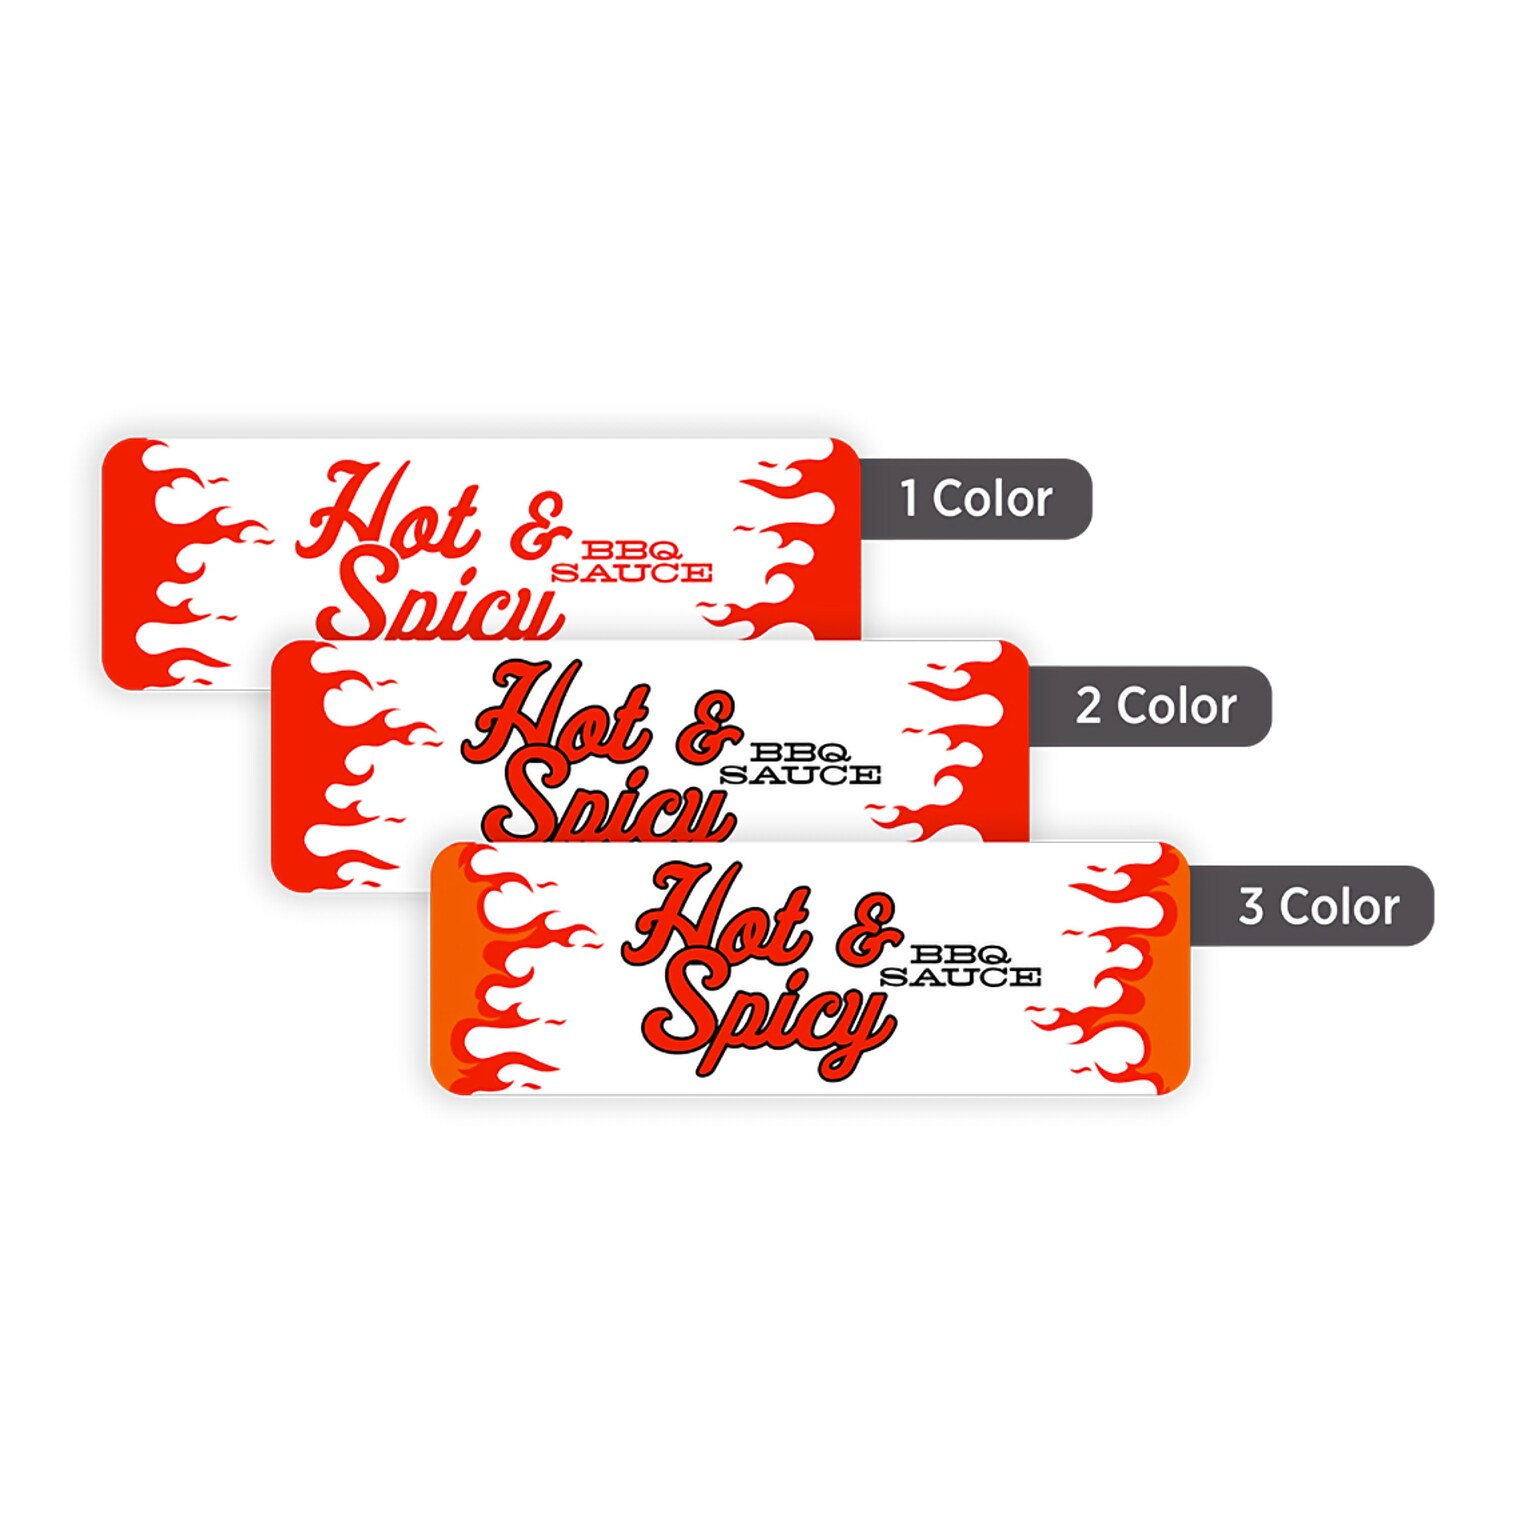 Custom Print Advertising Label, 1 x 3 Rectangle, 1 Standard Color, 1-Sided, 250 Labels/Roll